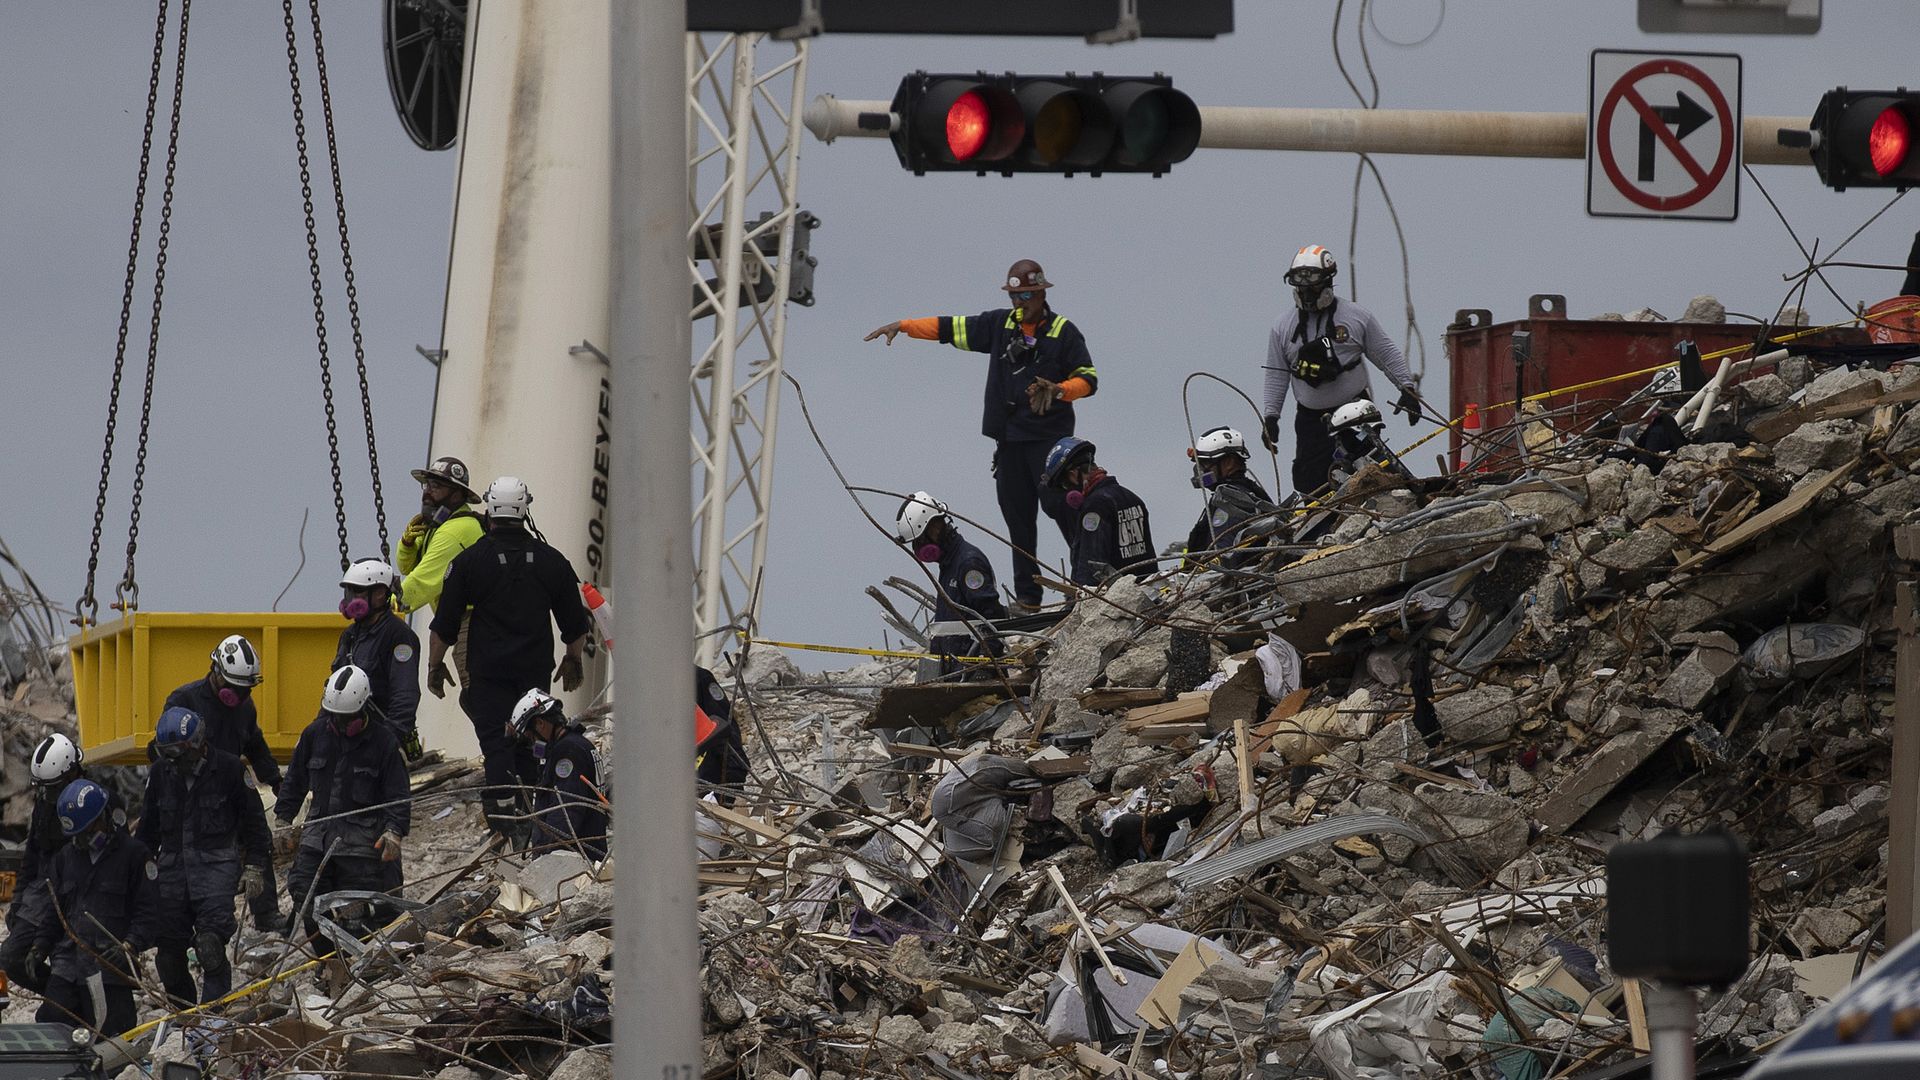 Photo of search and rescue workers climbing over rubble, with collapsed traffic lights hanging over them